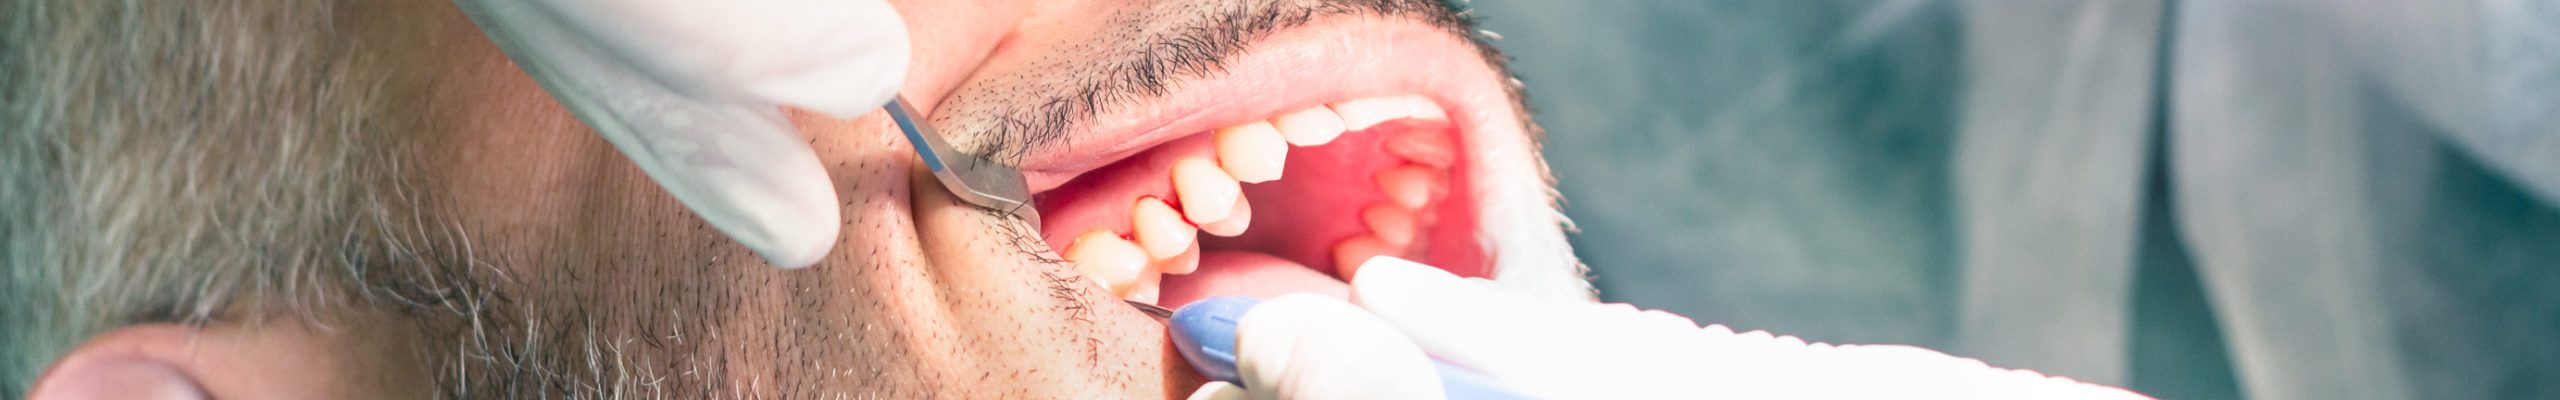 What Causes Plaque Buildup on Teeth?